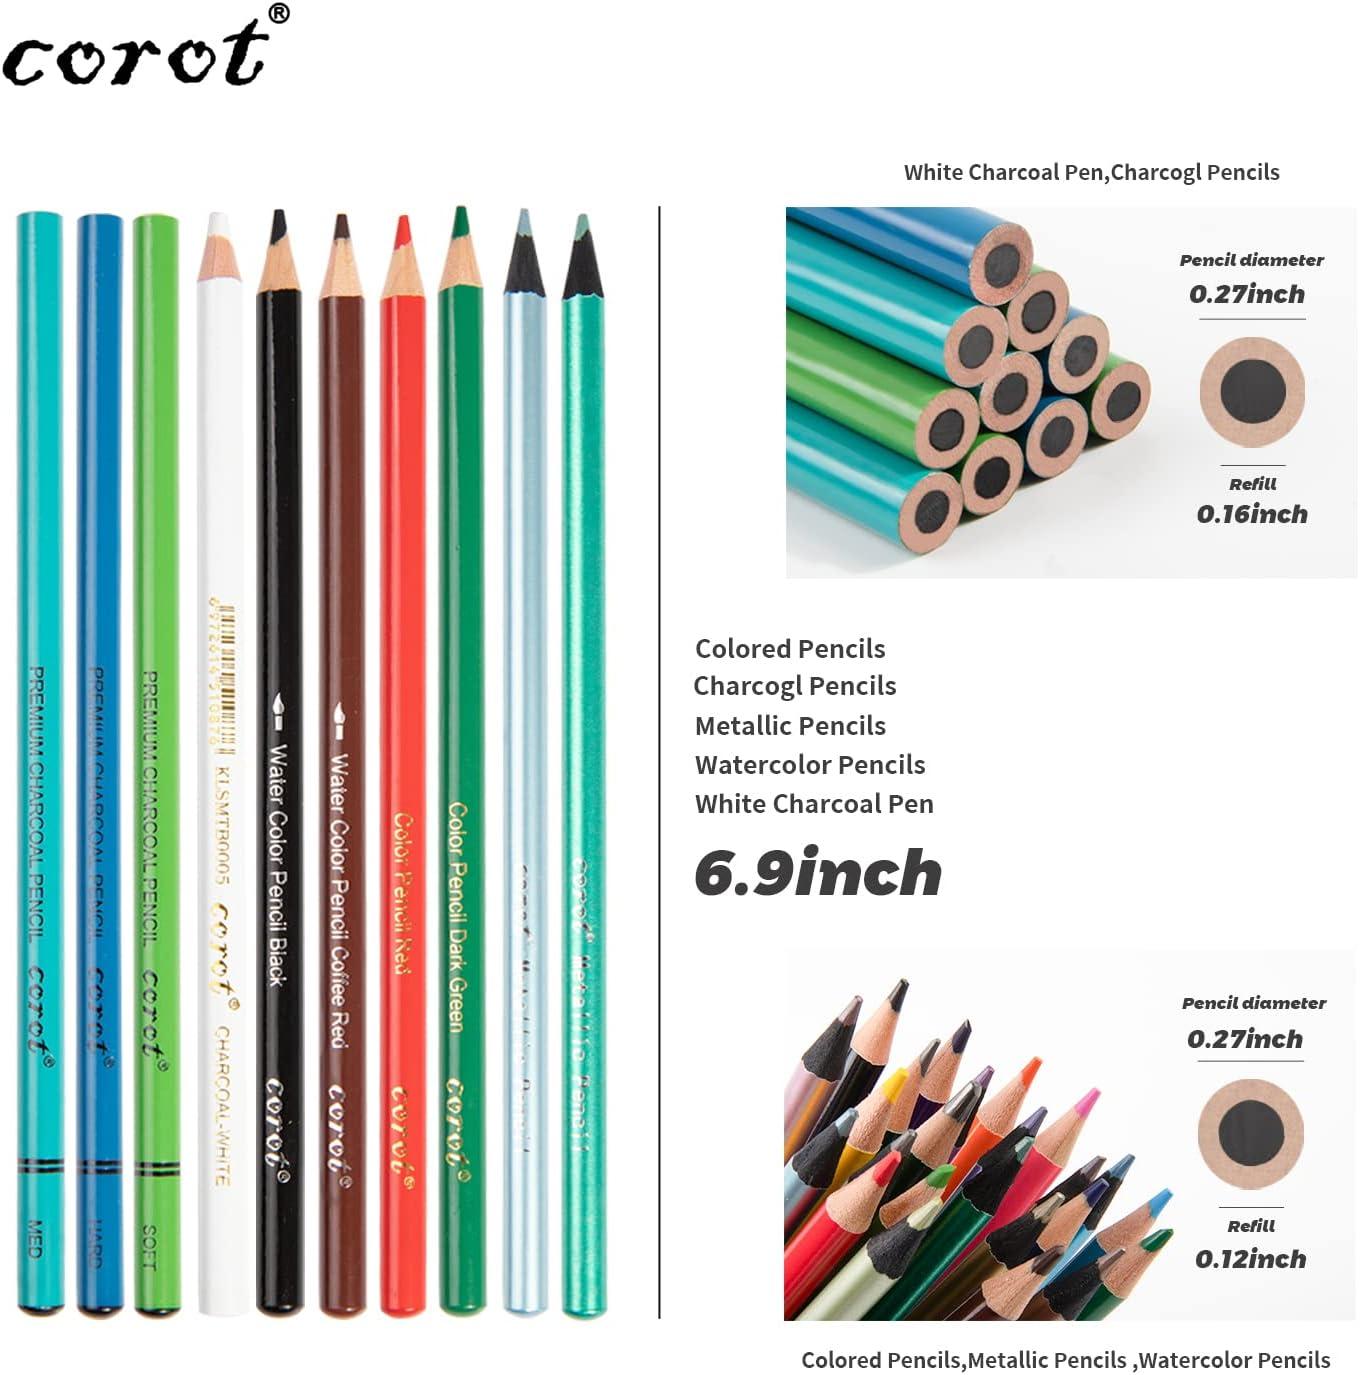 71 Professional Drawing Artist Kit Set Pencils and Sketch Charcoal